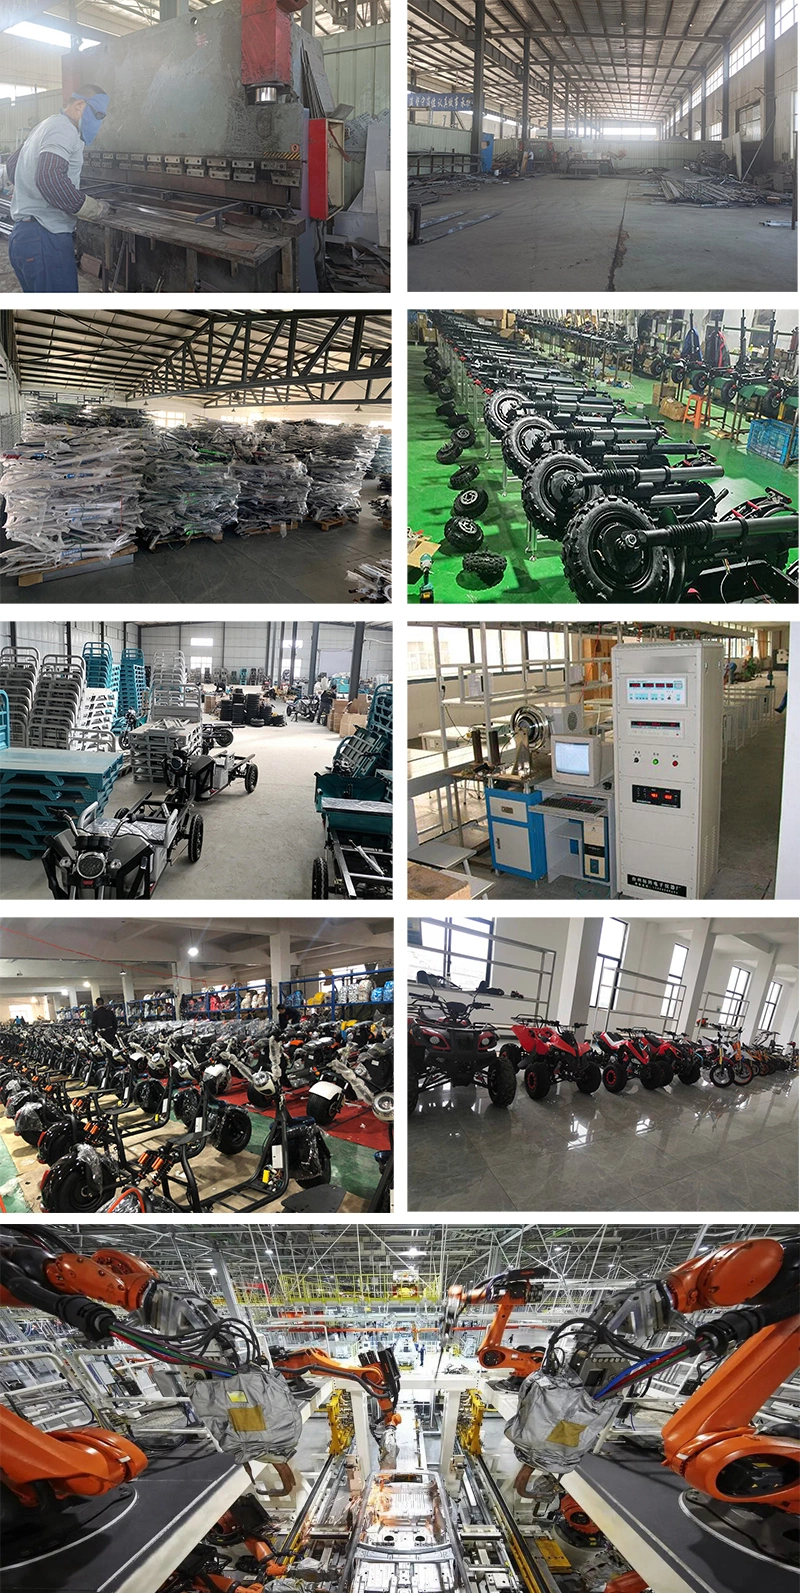 Factory Direct Sales Hot Selling in Africa Three Wheel Motorcycle Electrical and Petrol Tricycle